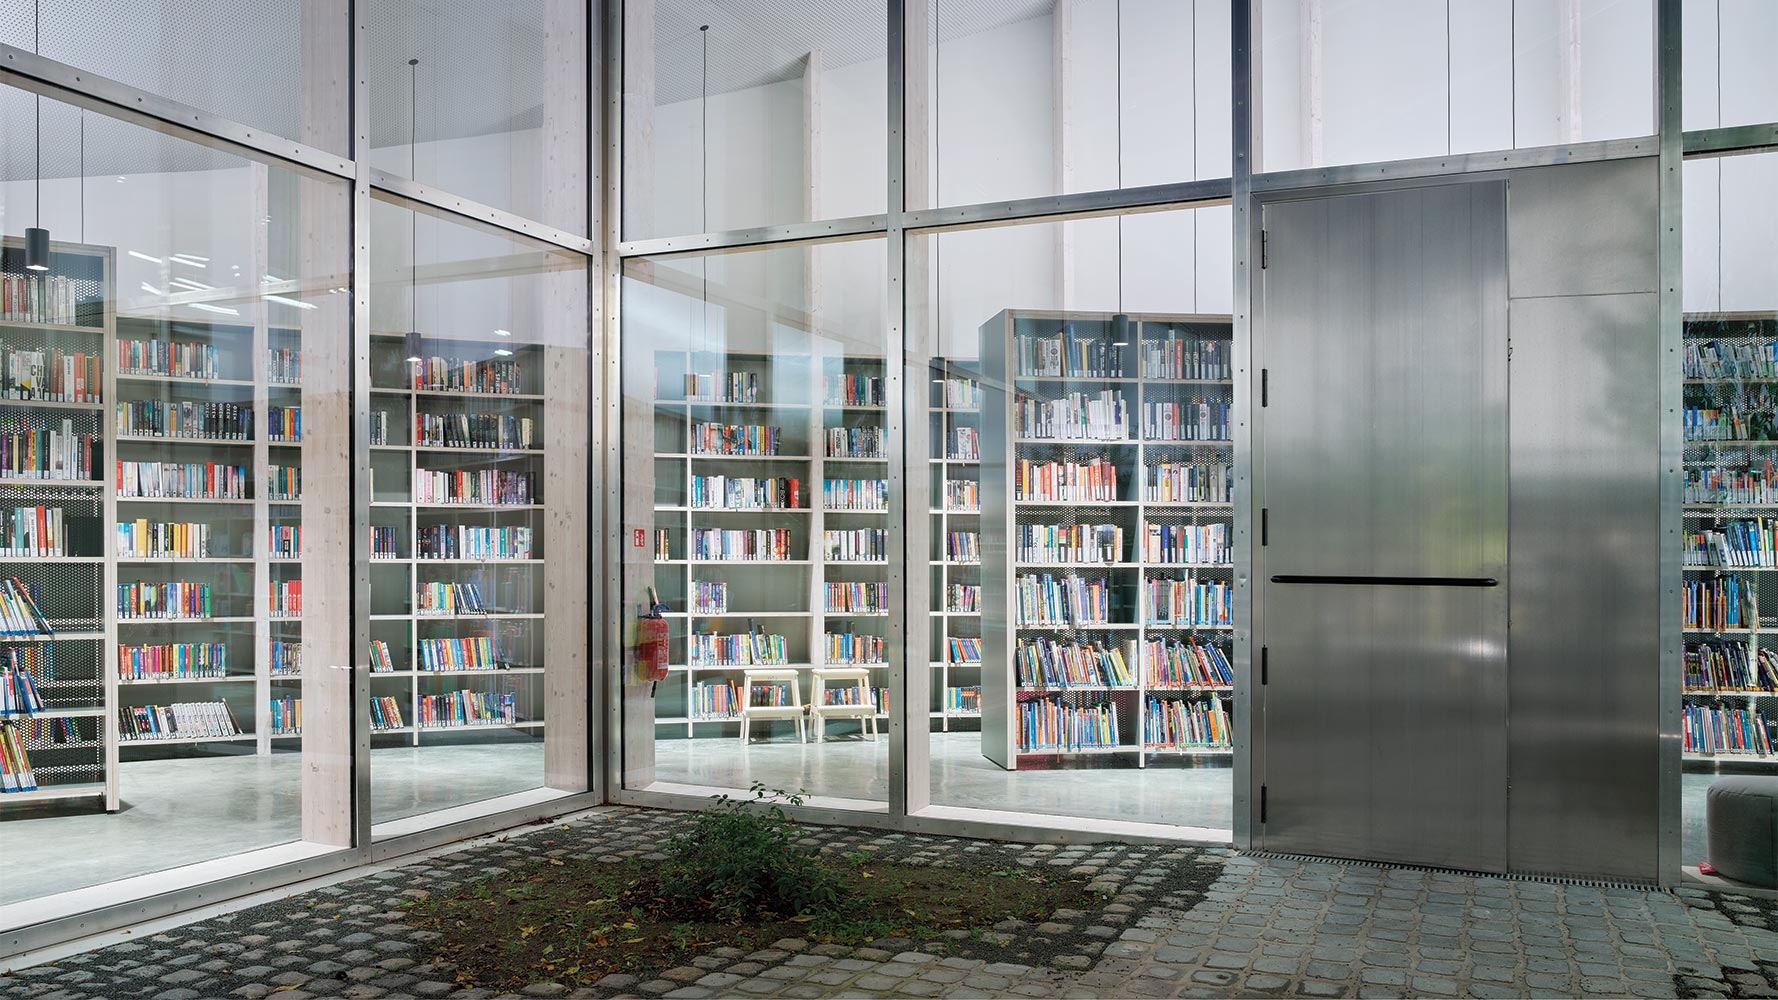 OFFICE KGDVS uses Simple Geometry to Accommodate the Growing Needs of a Library in Belgium